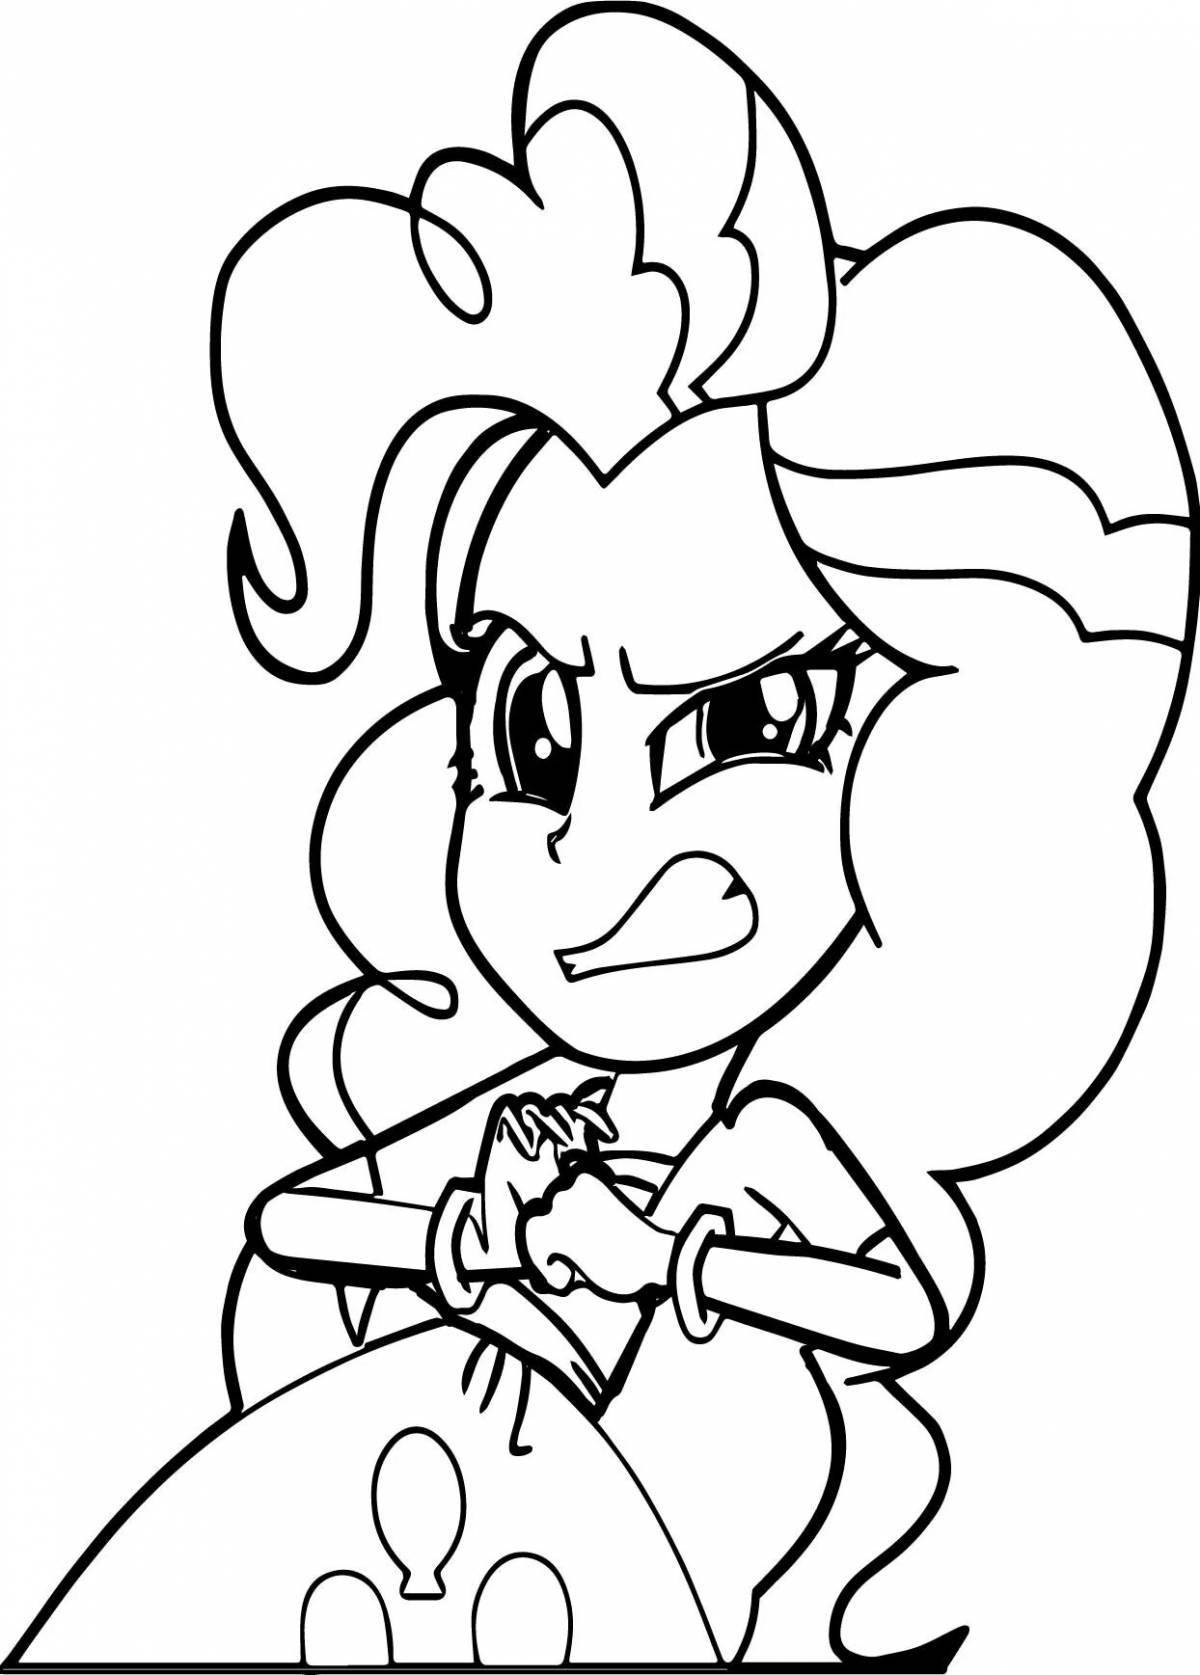 Pinkie Pie glowing equestria girls coloring page